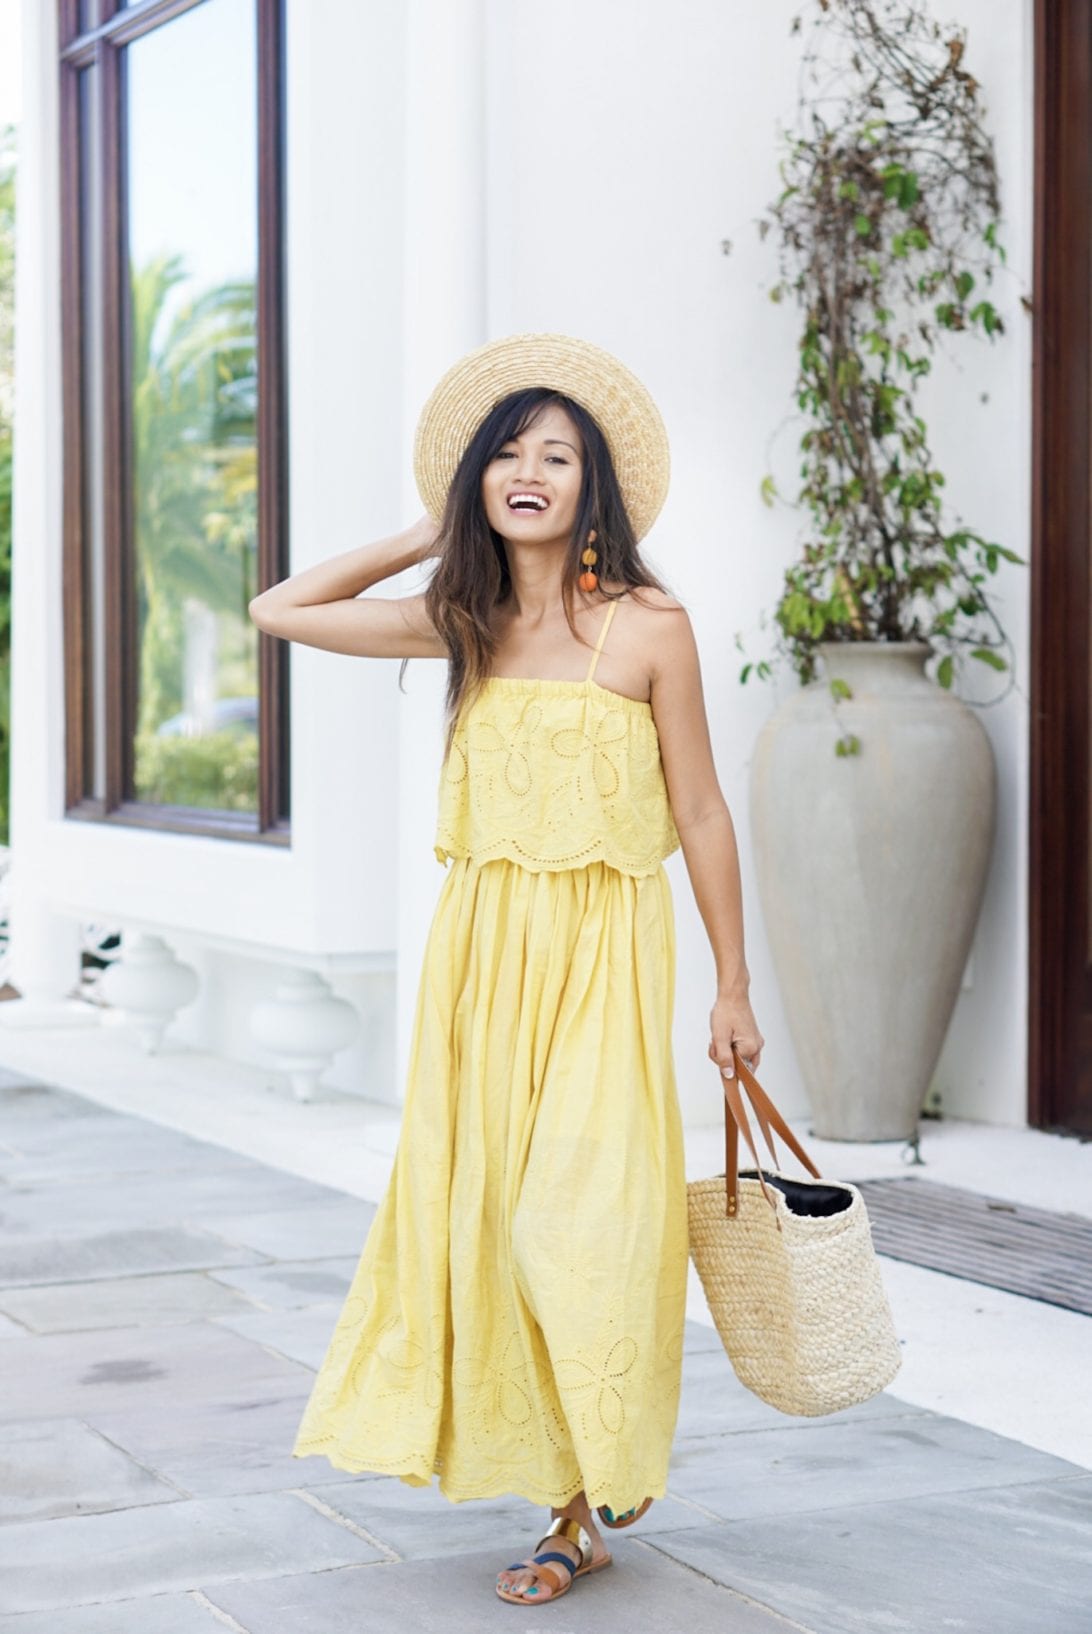 Tickle Me Picnic Embroidery Cotton Maxi Dress, yellow dress, beach dress, maxi dress, summer dress, dresses under $100, tote bag, straw bag, monogrammed straw bag, Marleylilly, alys beach